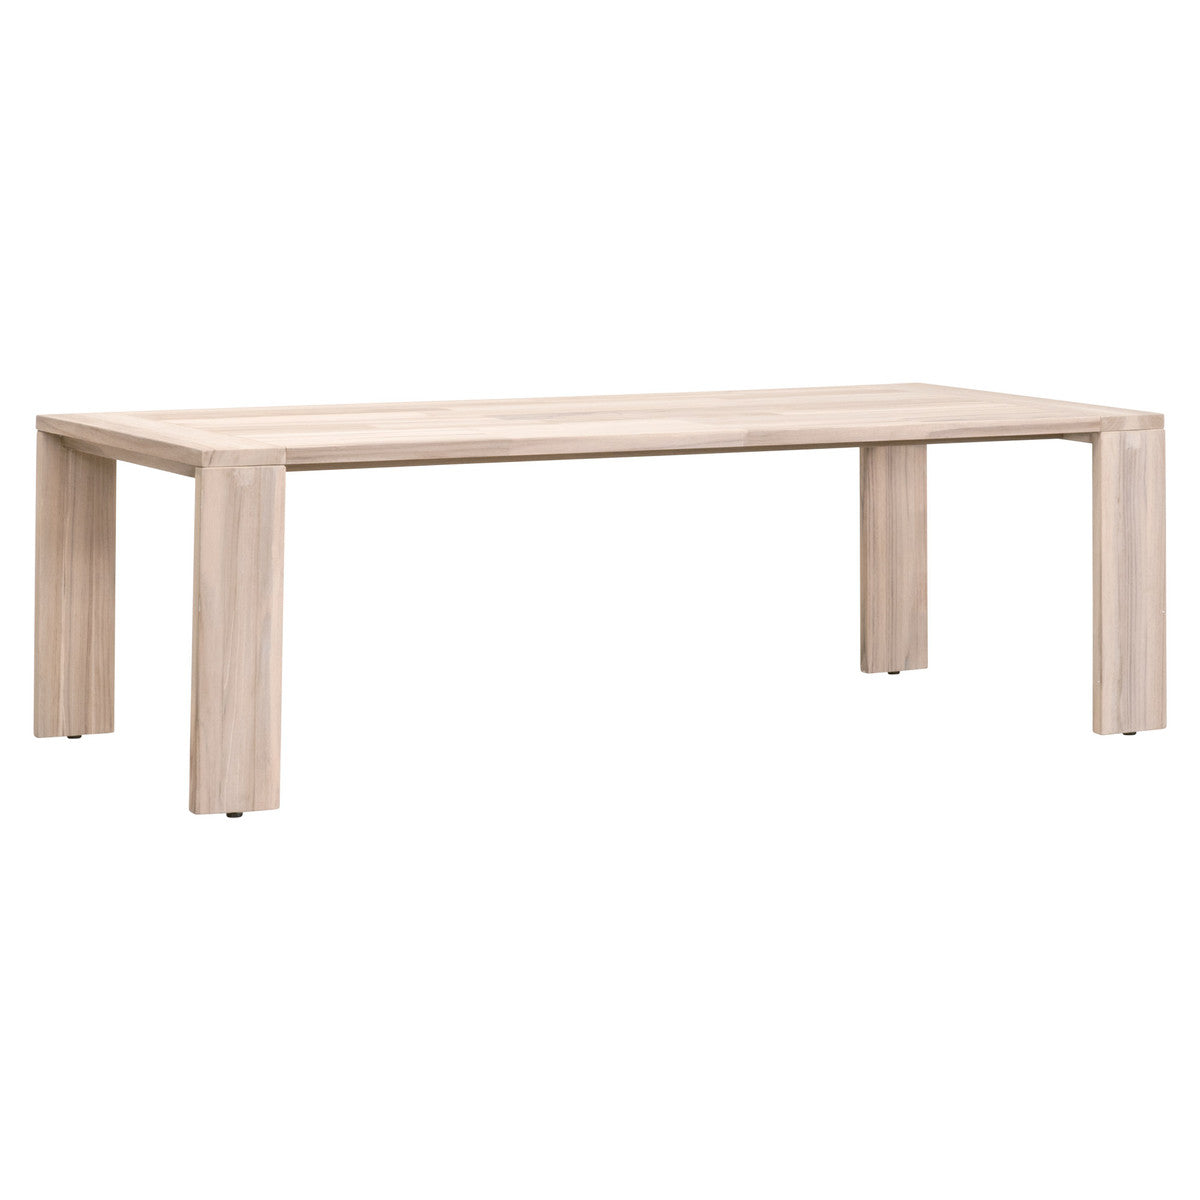 Big Sur Outdoor Dining Table in Gray Teak - 6830-L.GT